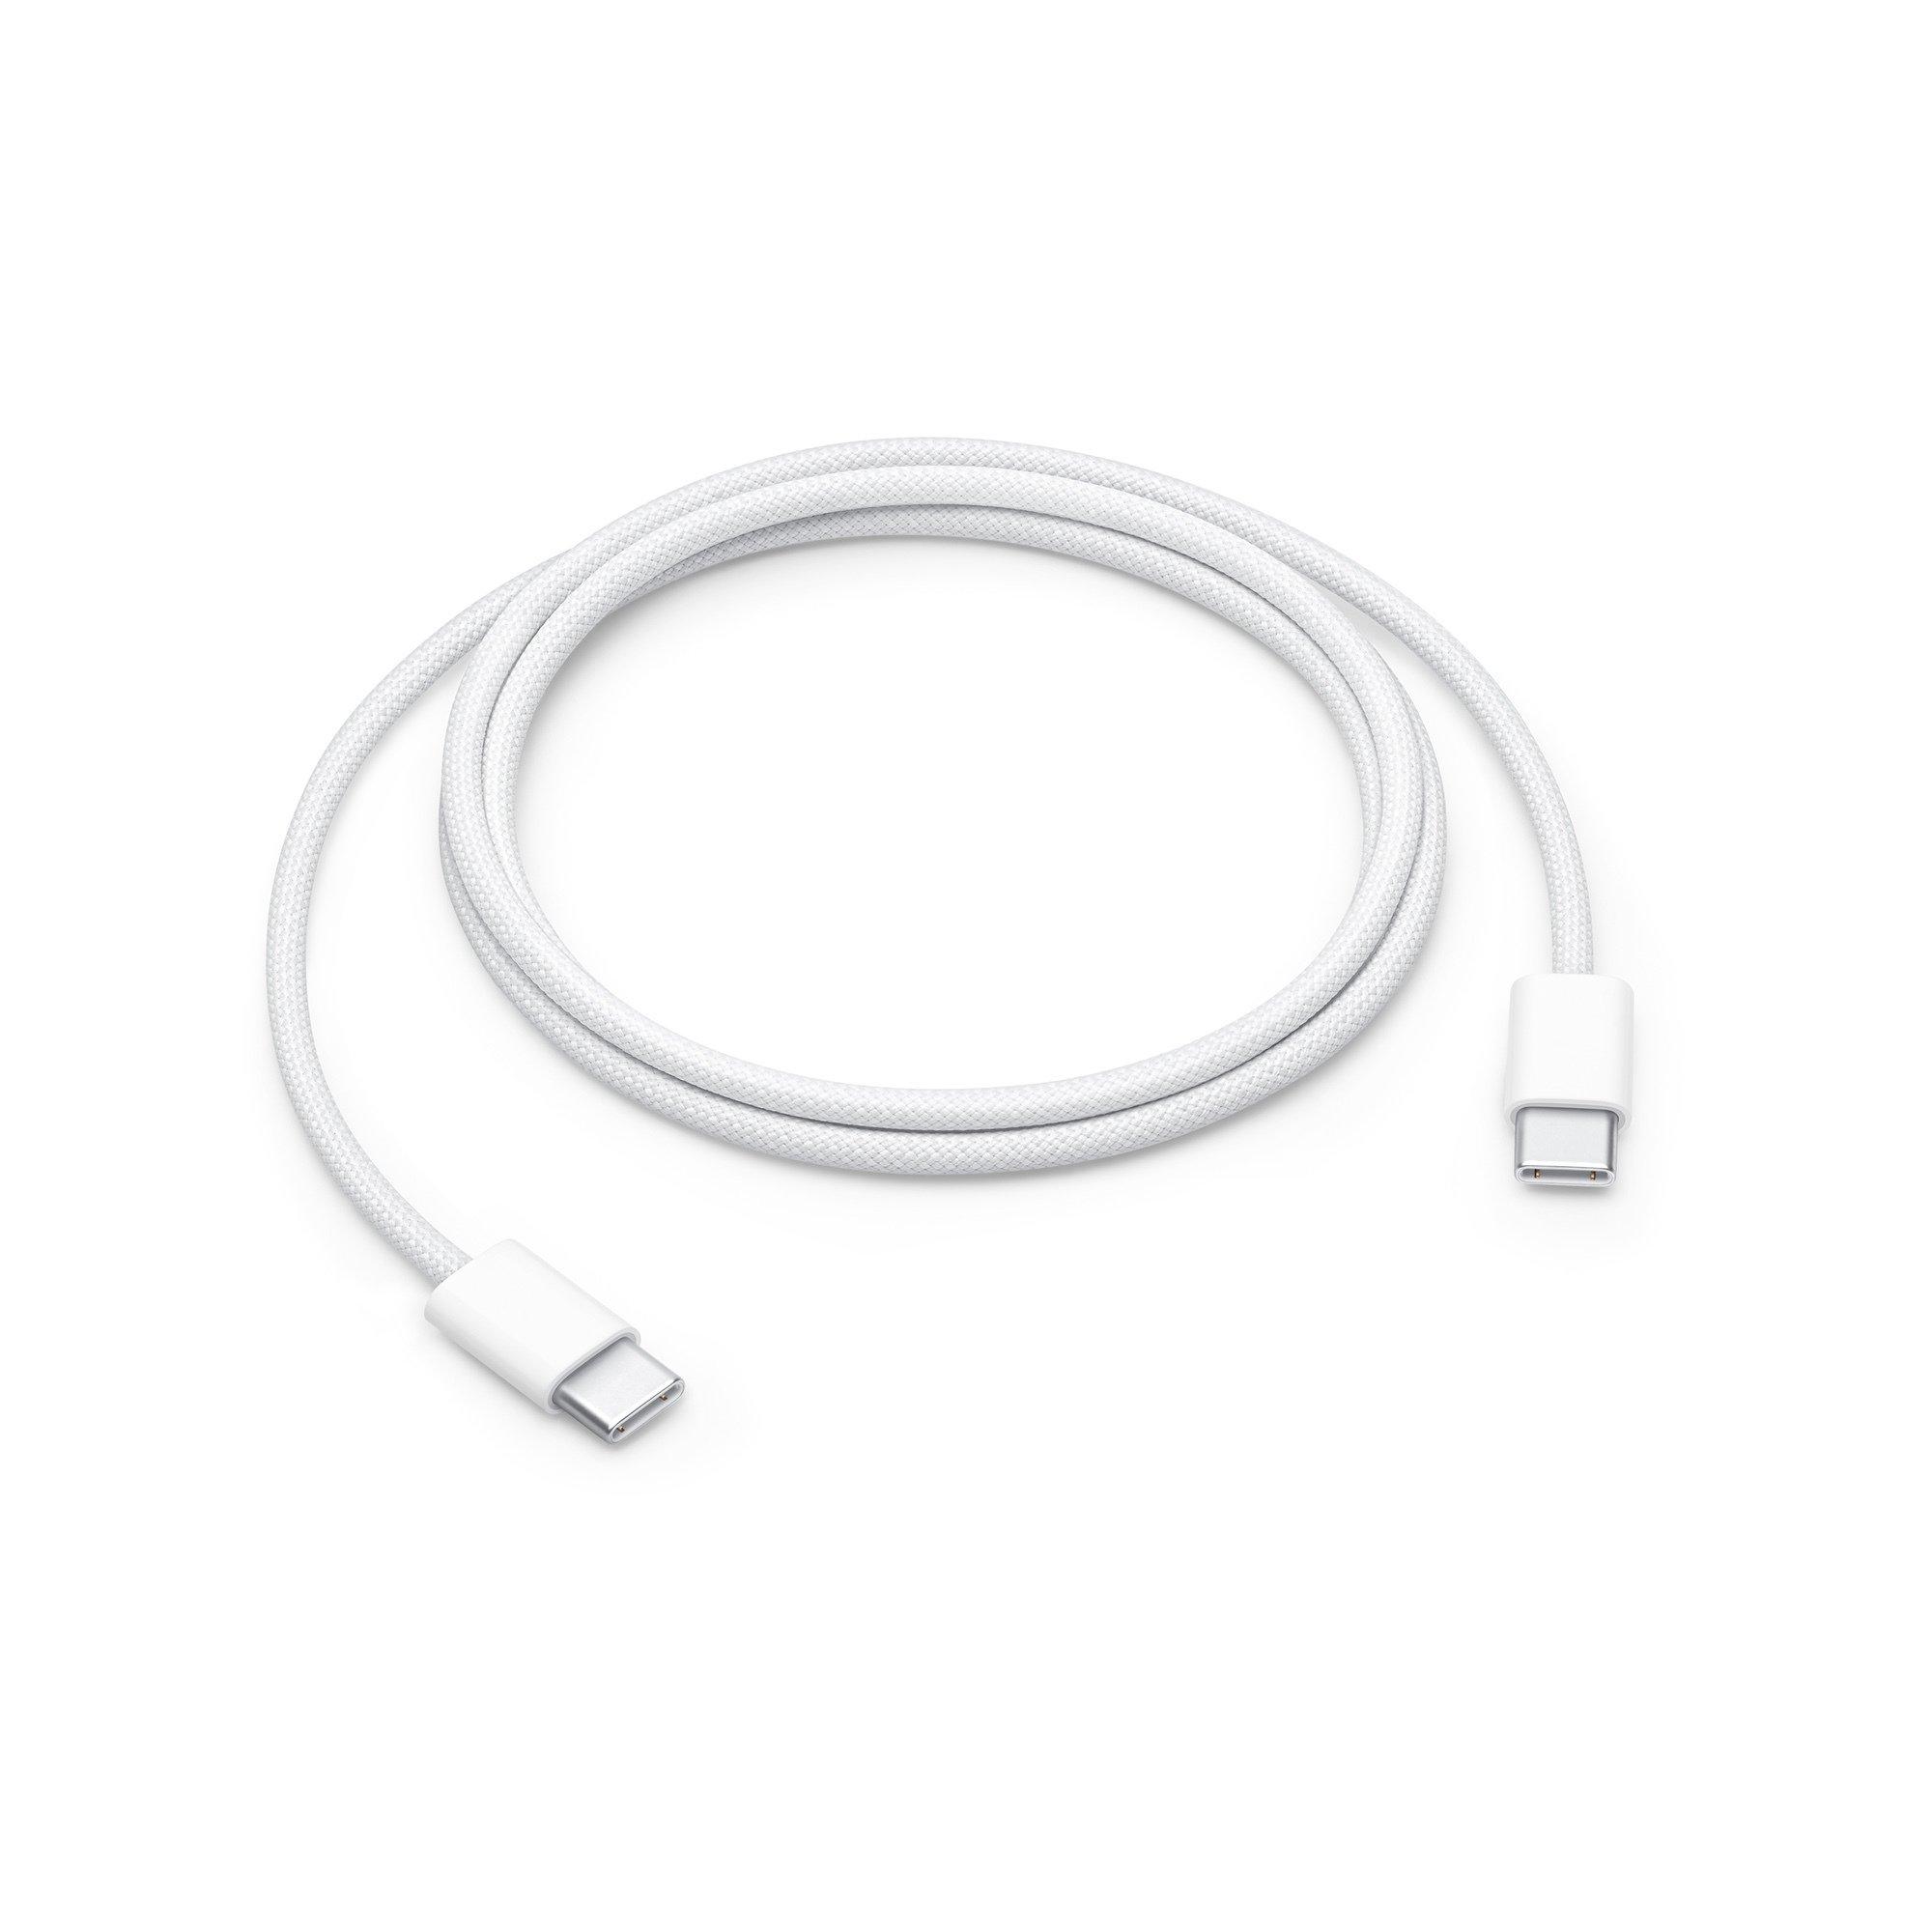 Apple USB-C Woven Charge Cable (1m) Cavo USB di ricarica/sync 